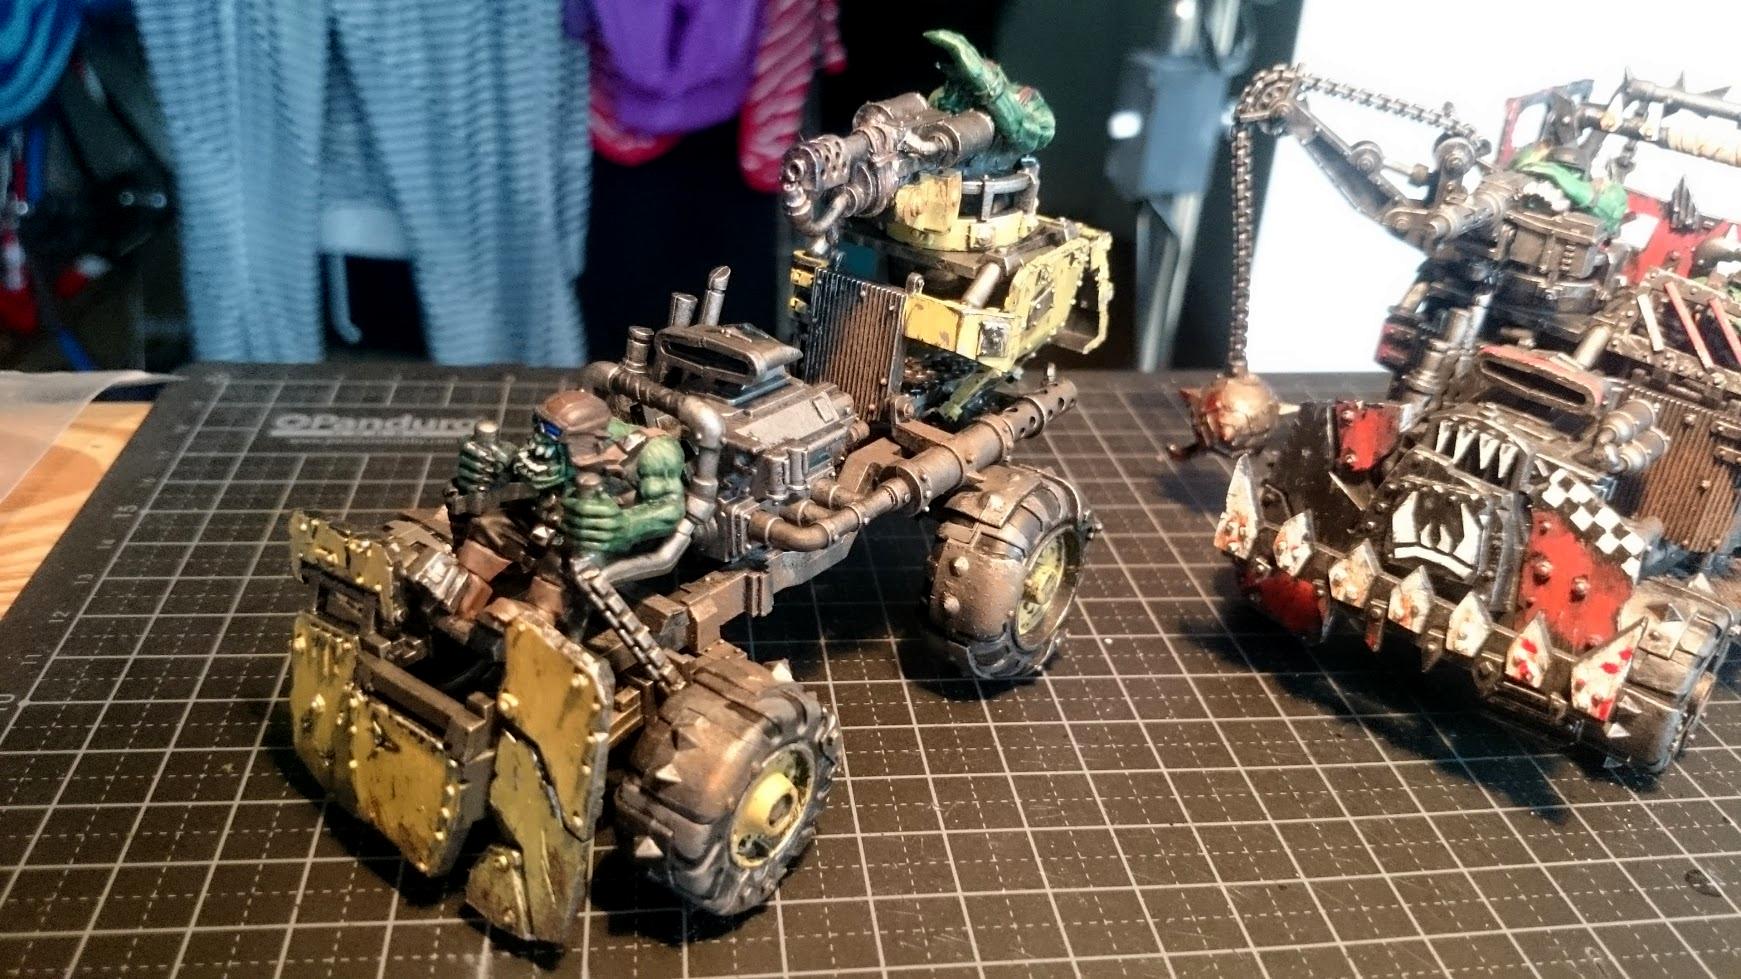 Buggy, Conversion, Orks, Painting, Skorcha, Warbuggy, Warhammer 40,000, Weathered